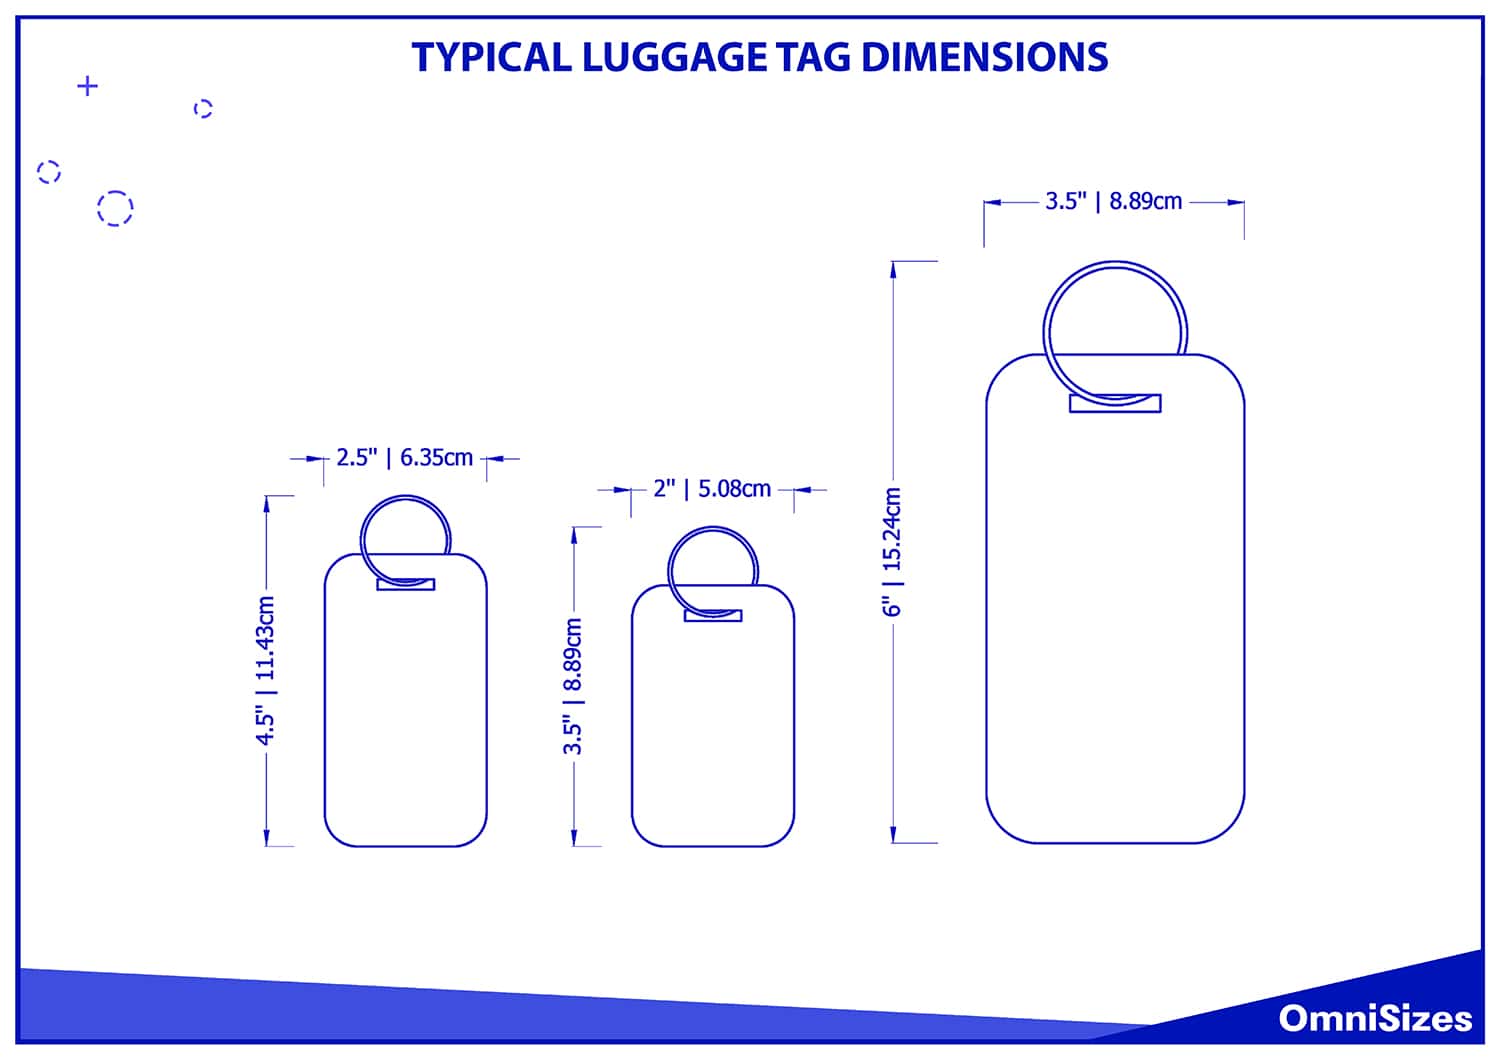 Typical luggage tag dimensions